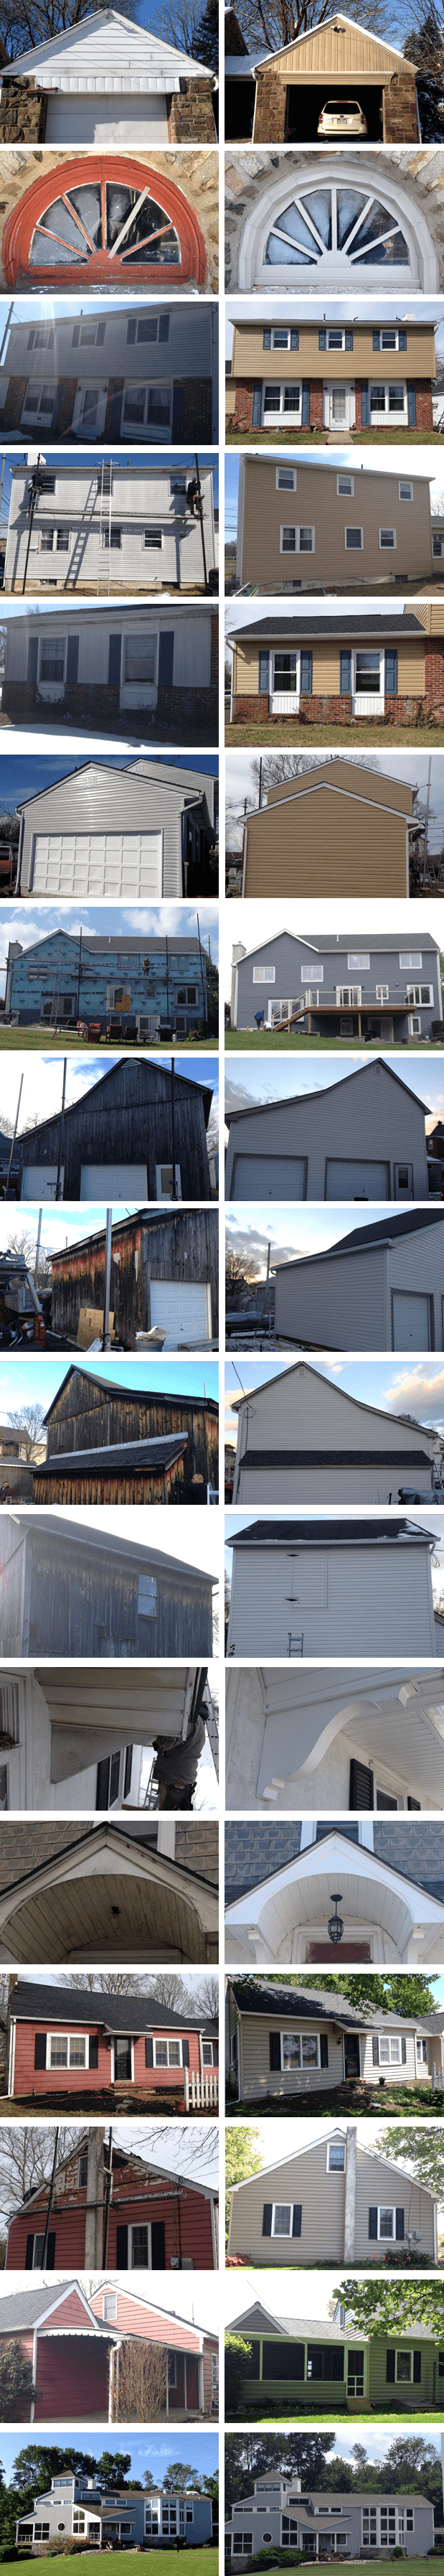 Timothy Schaffer Roofing siding and windows Gallery